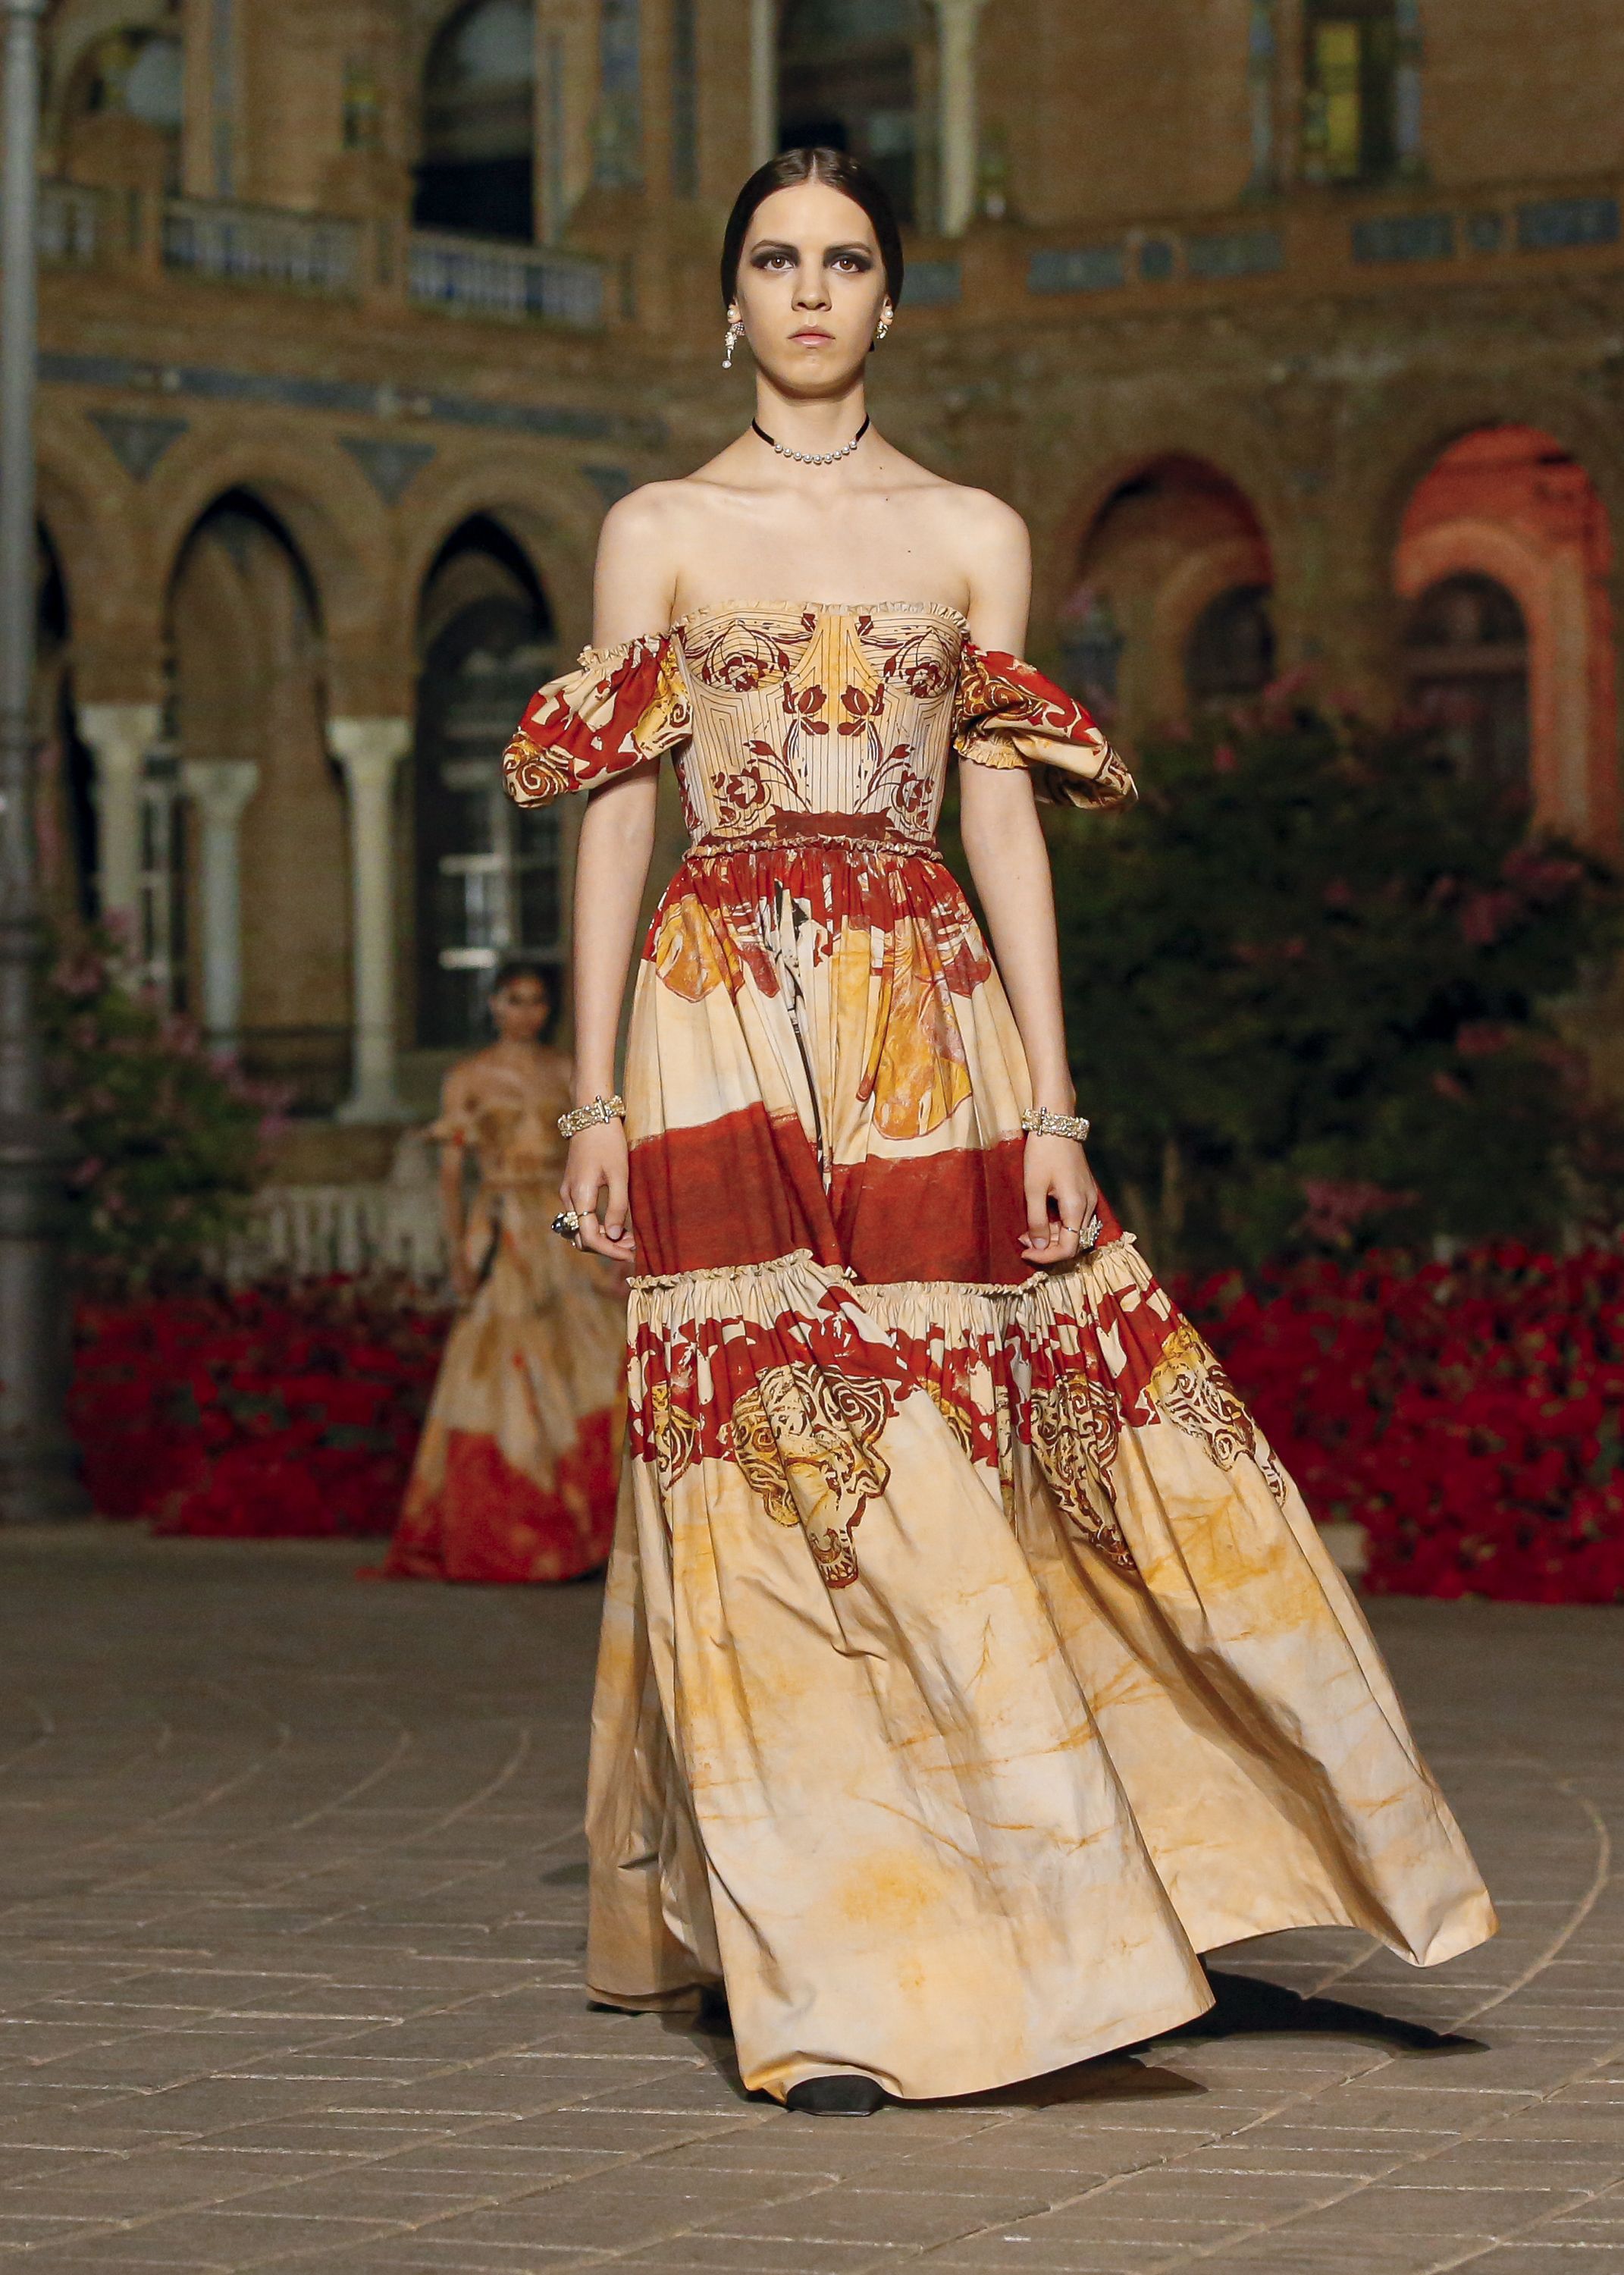 Dior Sets Seville Alight With Fashion and Flamenco Show  WWD